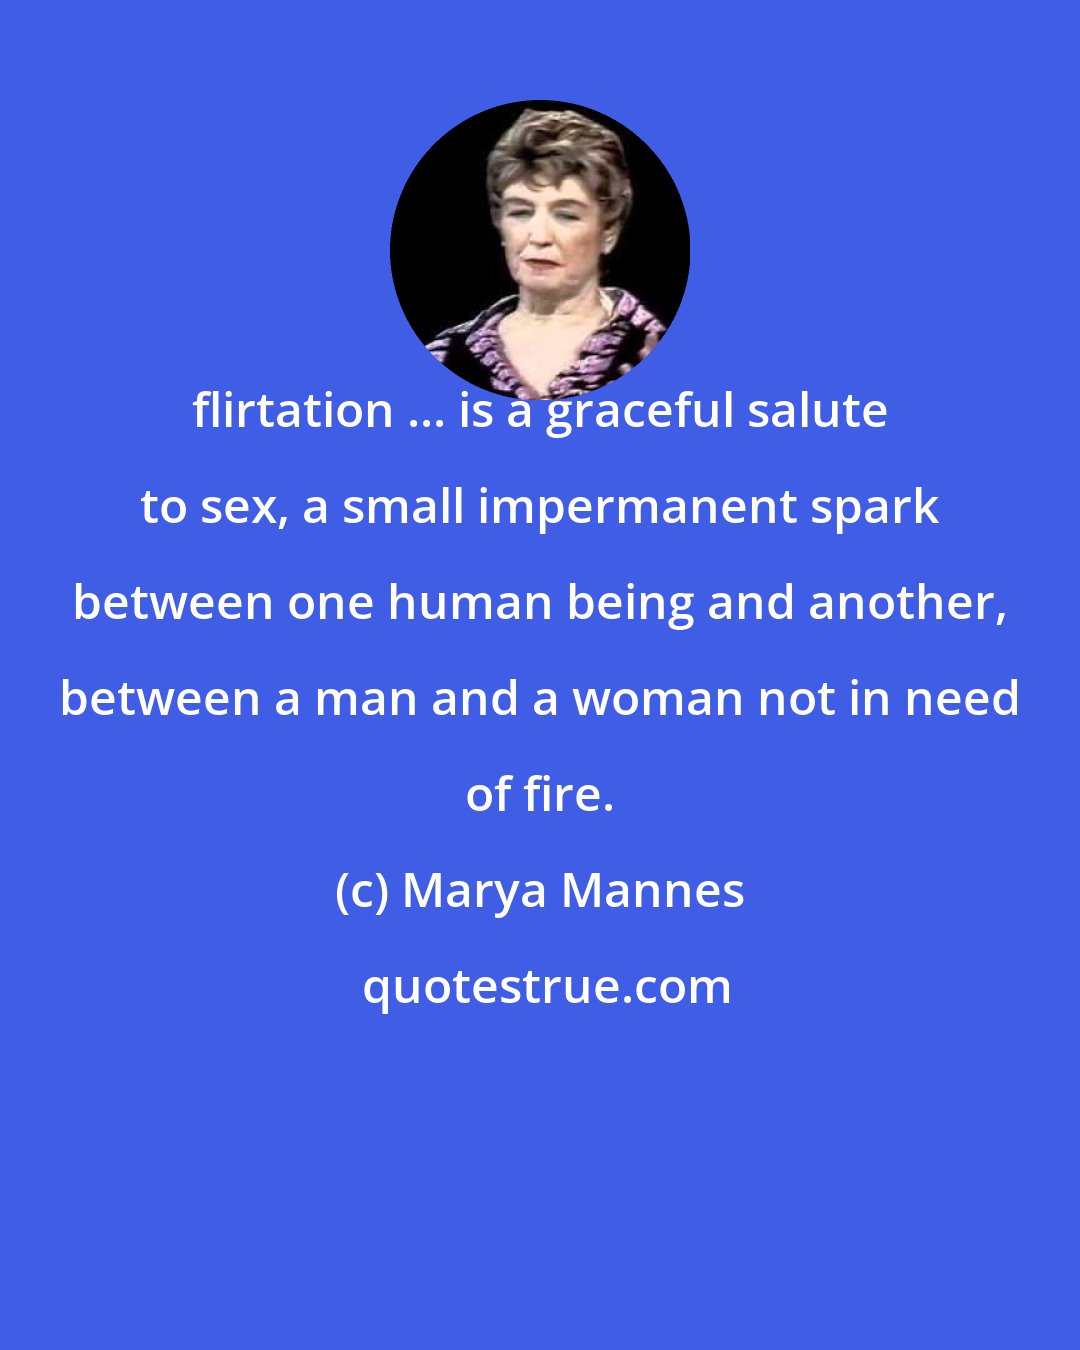 Marya Mannes: flirtation ... is a graceful salute to sex, a small impermanent spark between one human being and another, between a man and a woman not in need of fire.